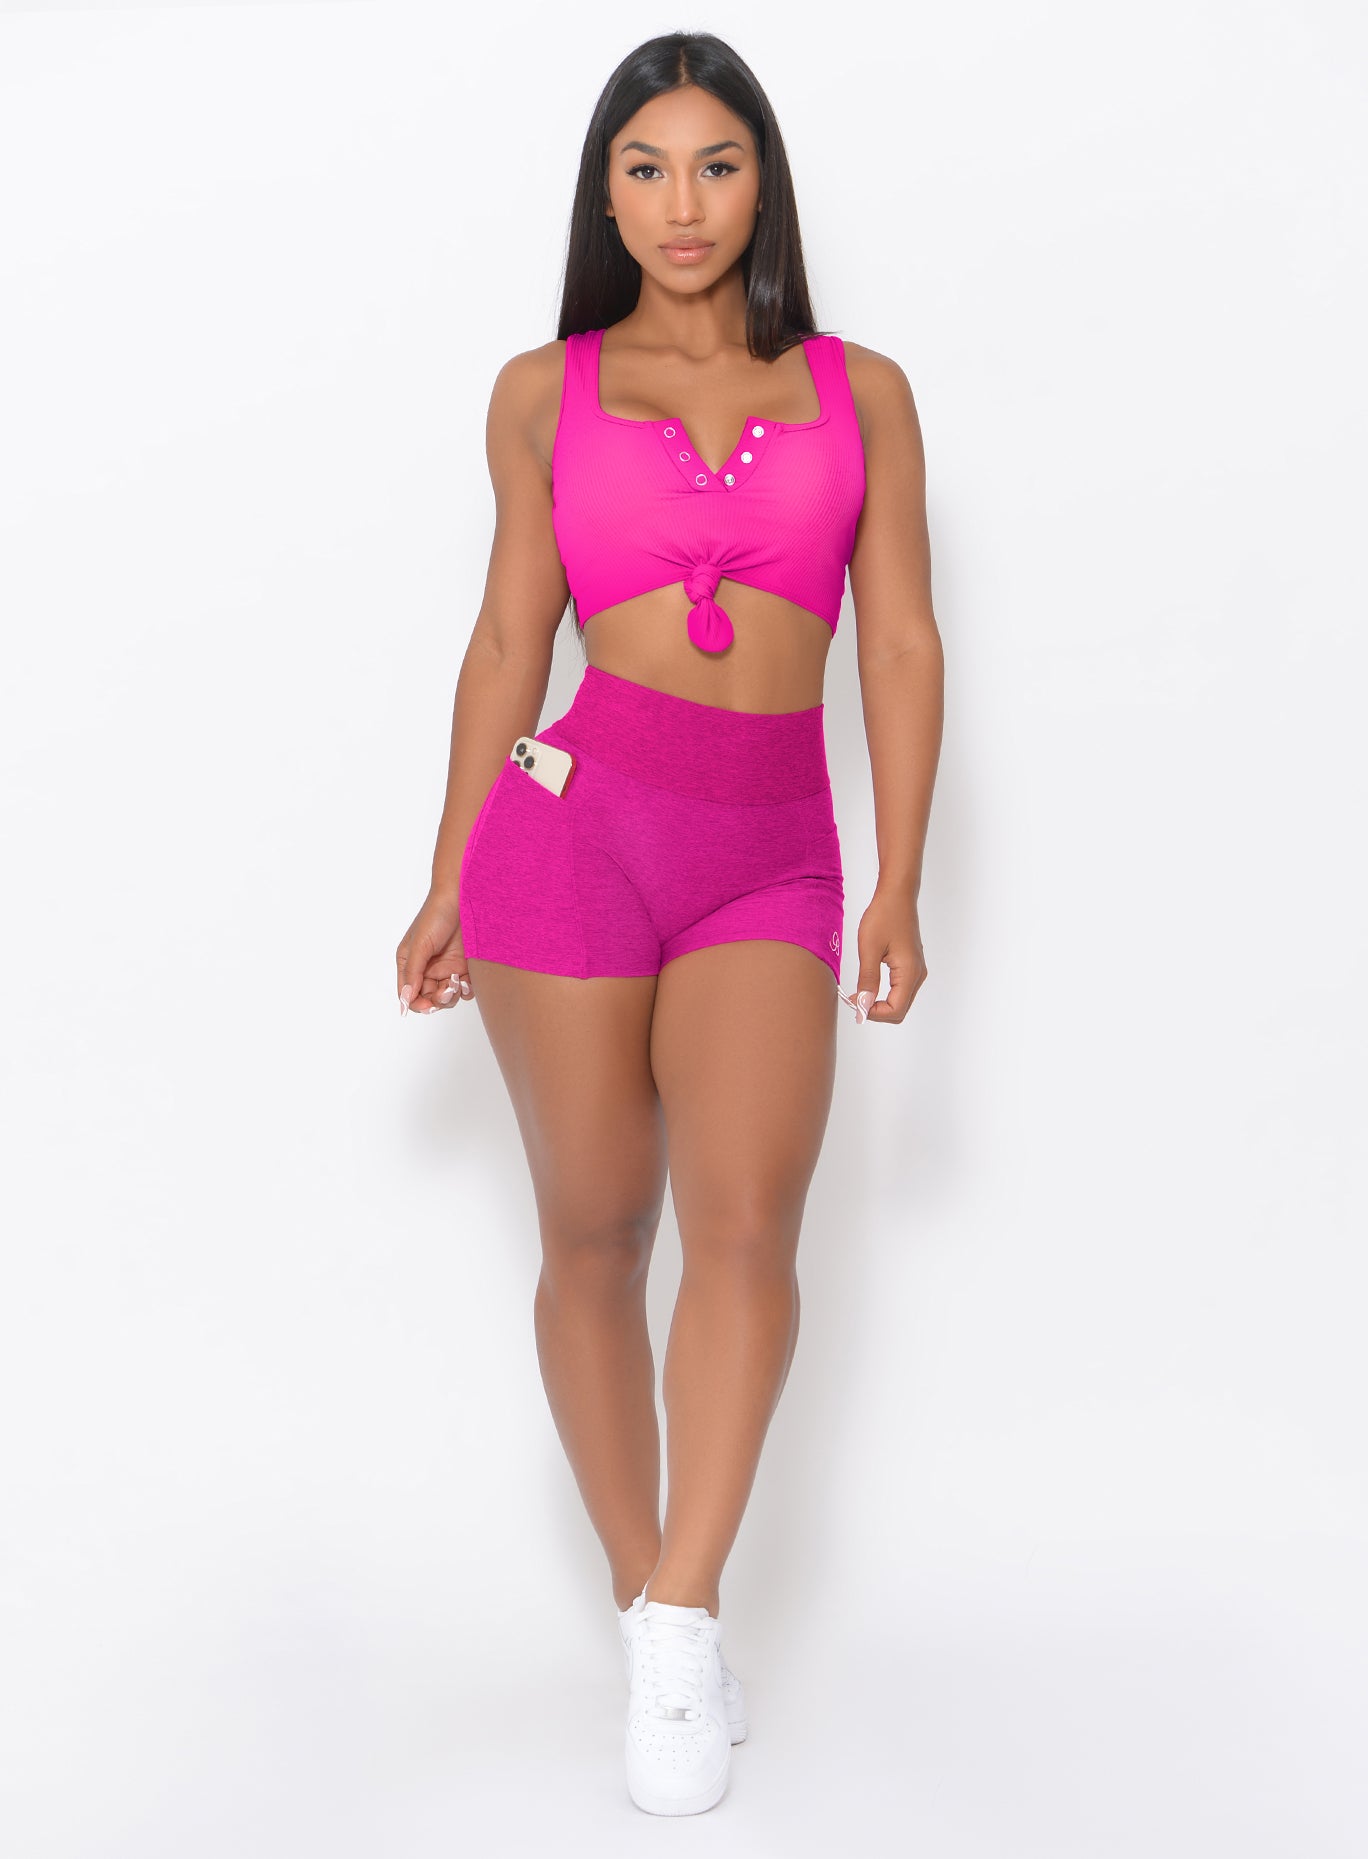 front profile view of a model wearing our Curves Shorts in Ultra Pink color and a matching Sports Bra